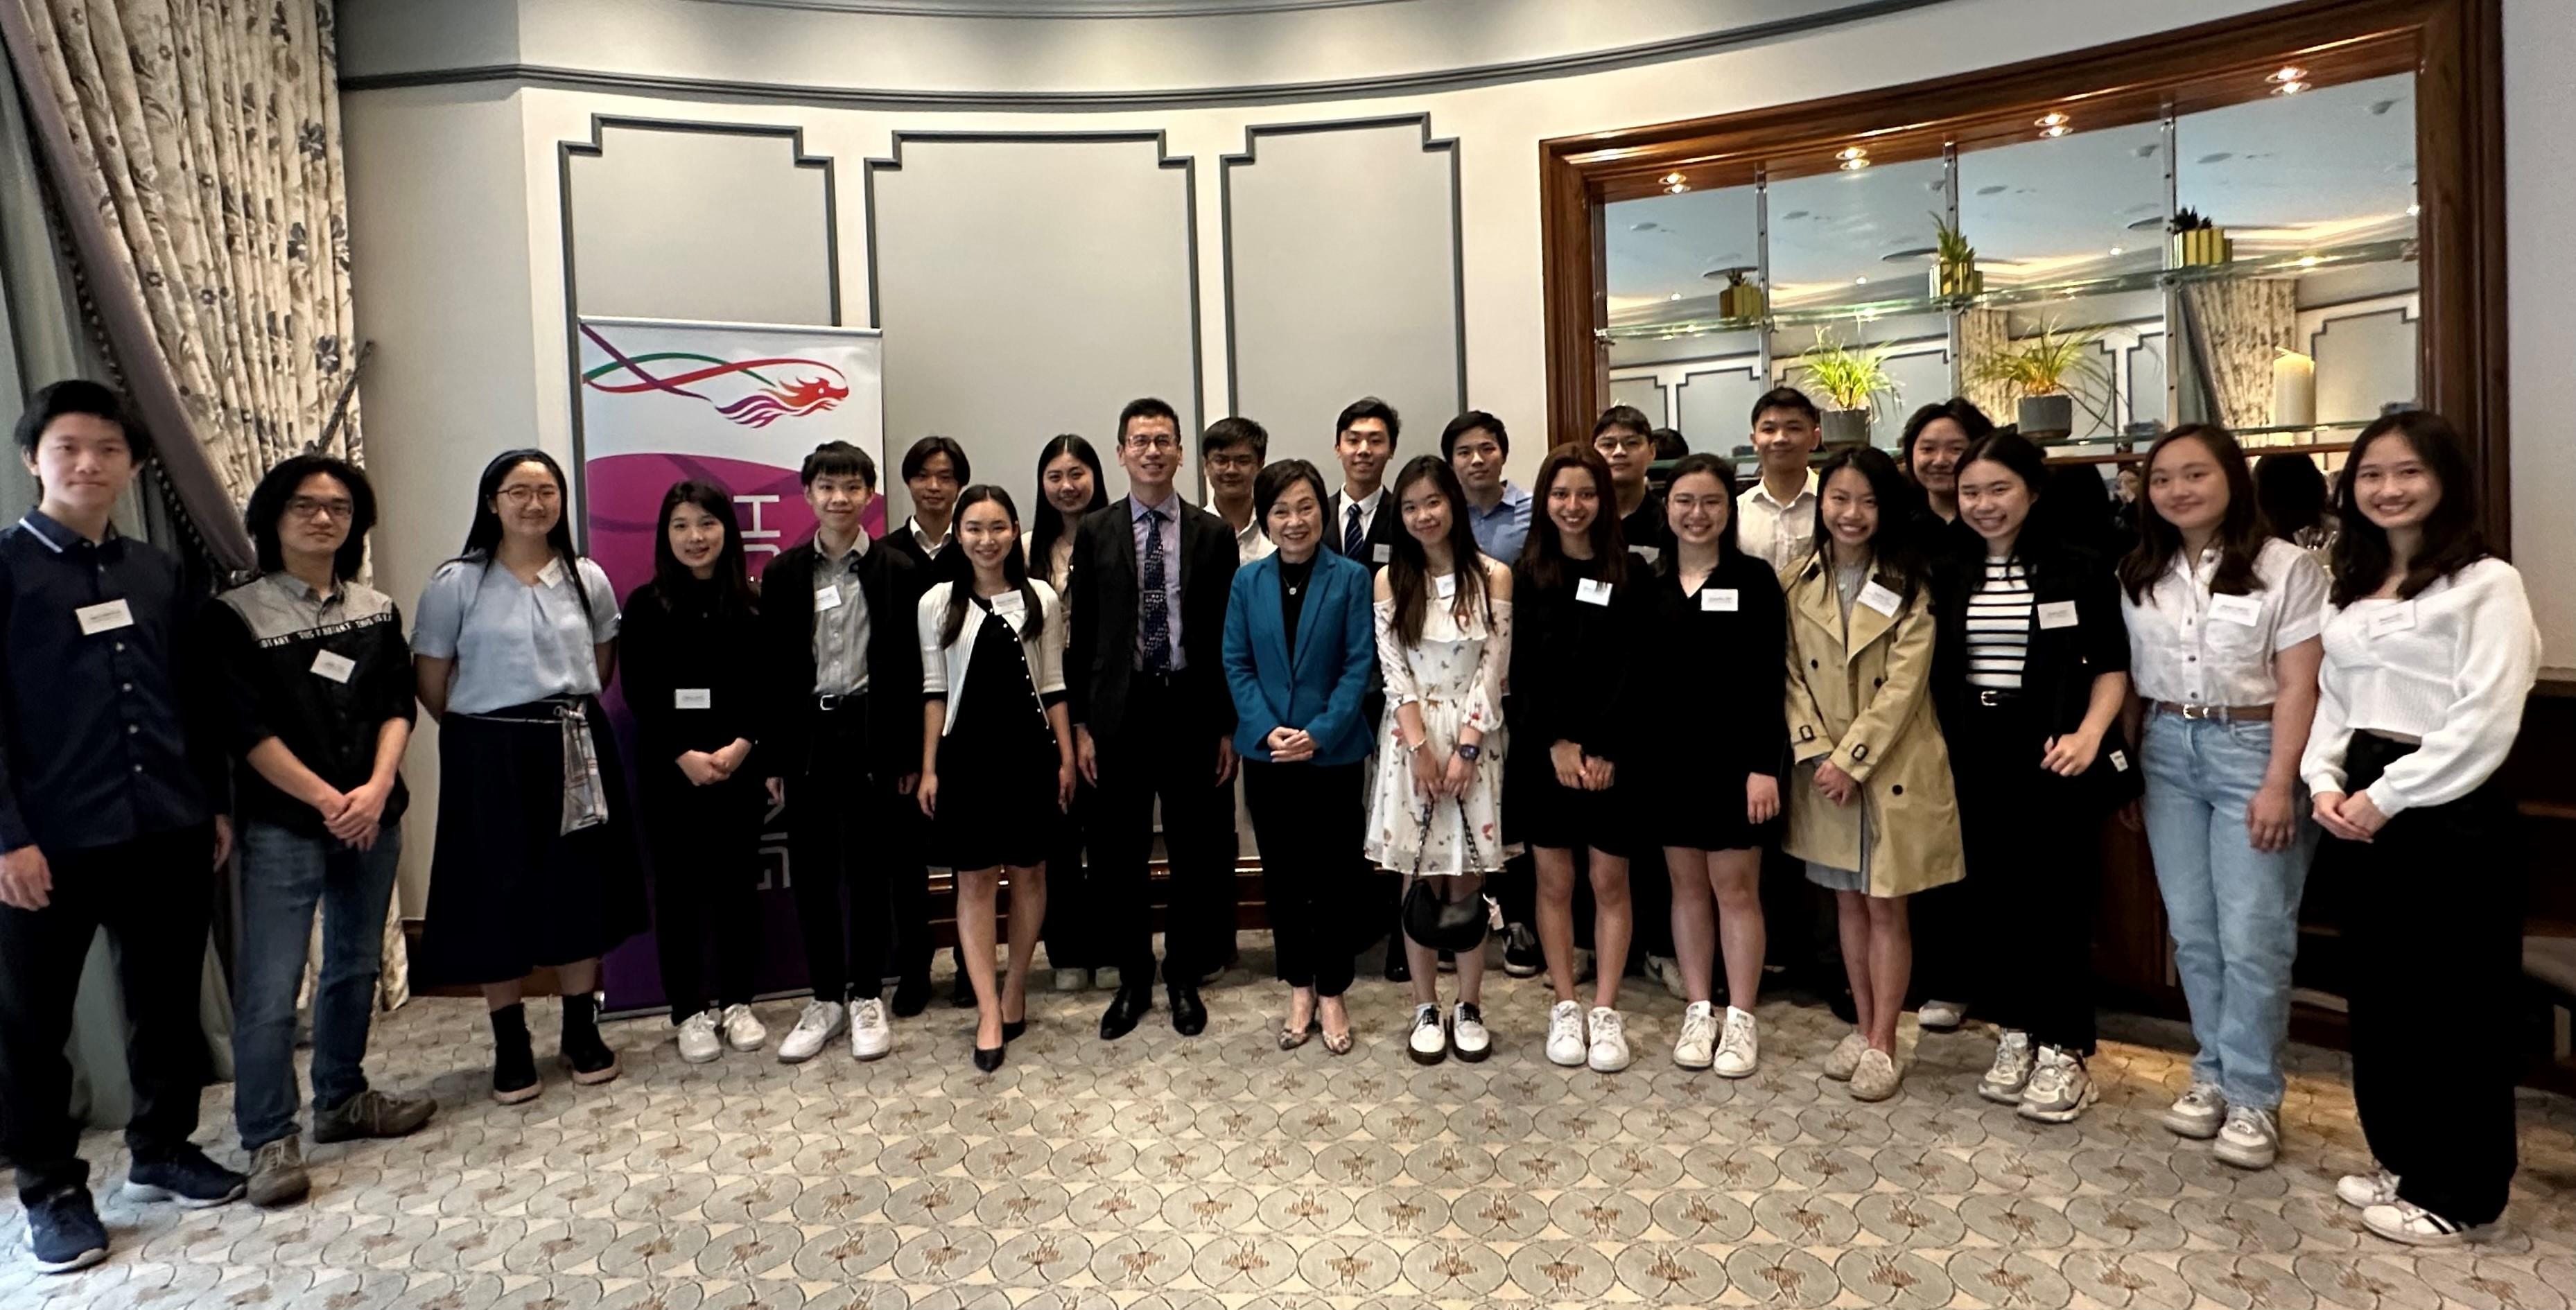 The Secretary for Education, Dr Choi Yuk-lin, continued her visit in London, the United Kingdom (UK), on May 11 (London time). Photo shows Dr Choi (front row, centre), accompanied by the Director-General of the Hong Kong Economic and Trade Office, London, Mr Gilford Law (front row, seventh left), meeting Hong Kong students studying at renowned universities in the UK under the Hong Kong Scholarship for Excellence Scheme.